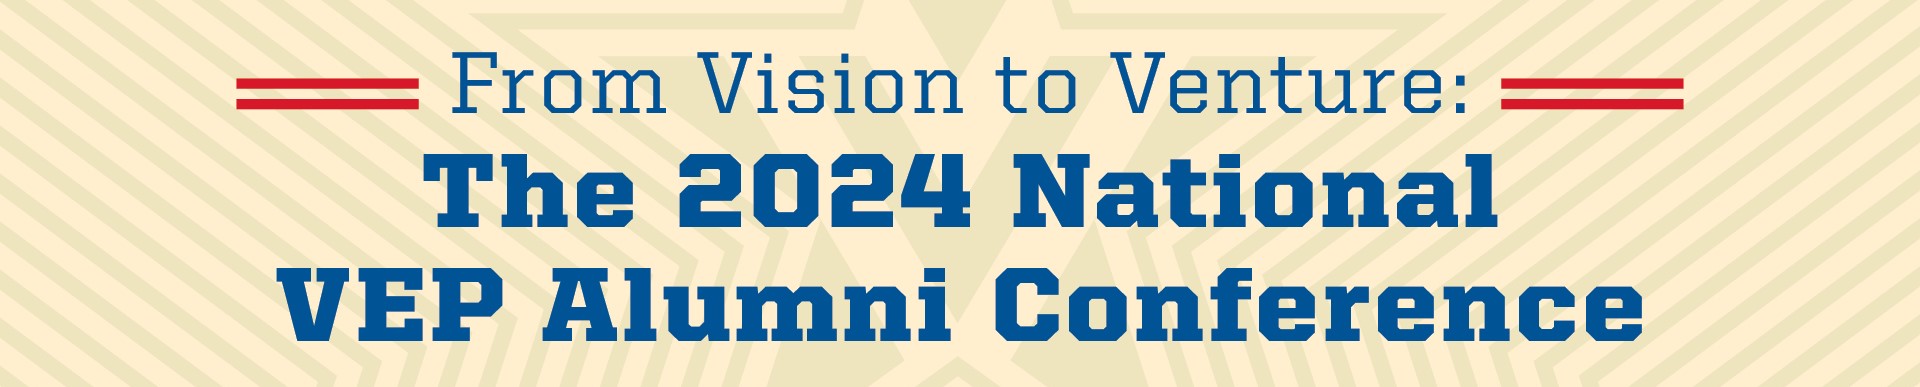 From Vision to Venture: The 2024 National VEP Alumni Conference